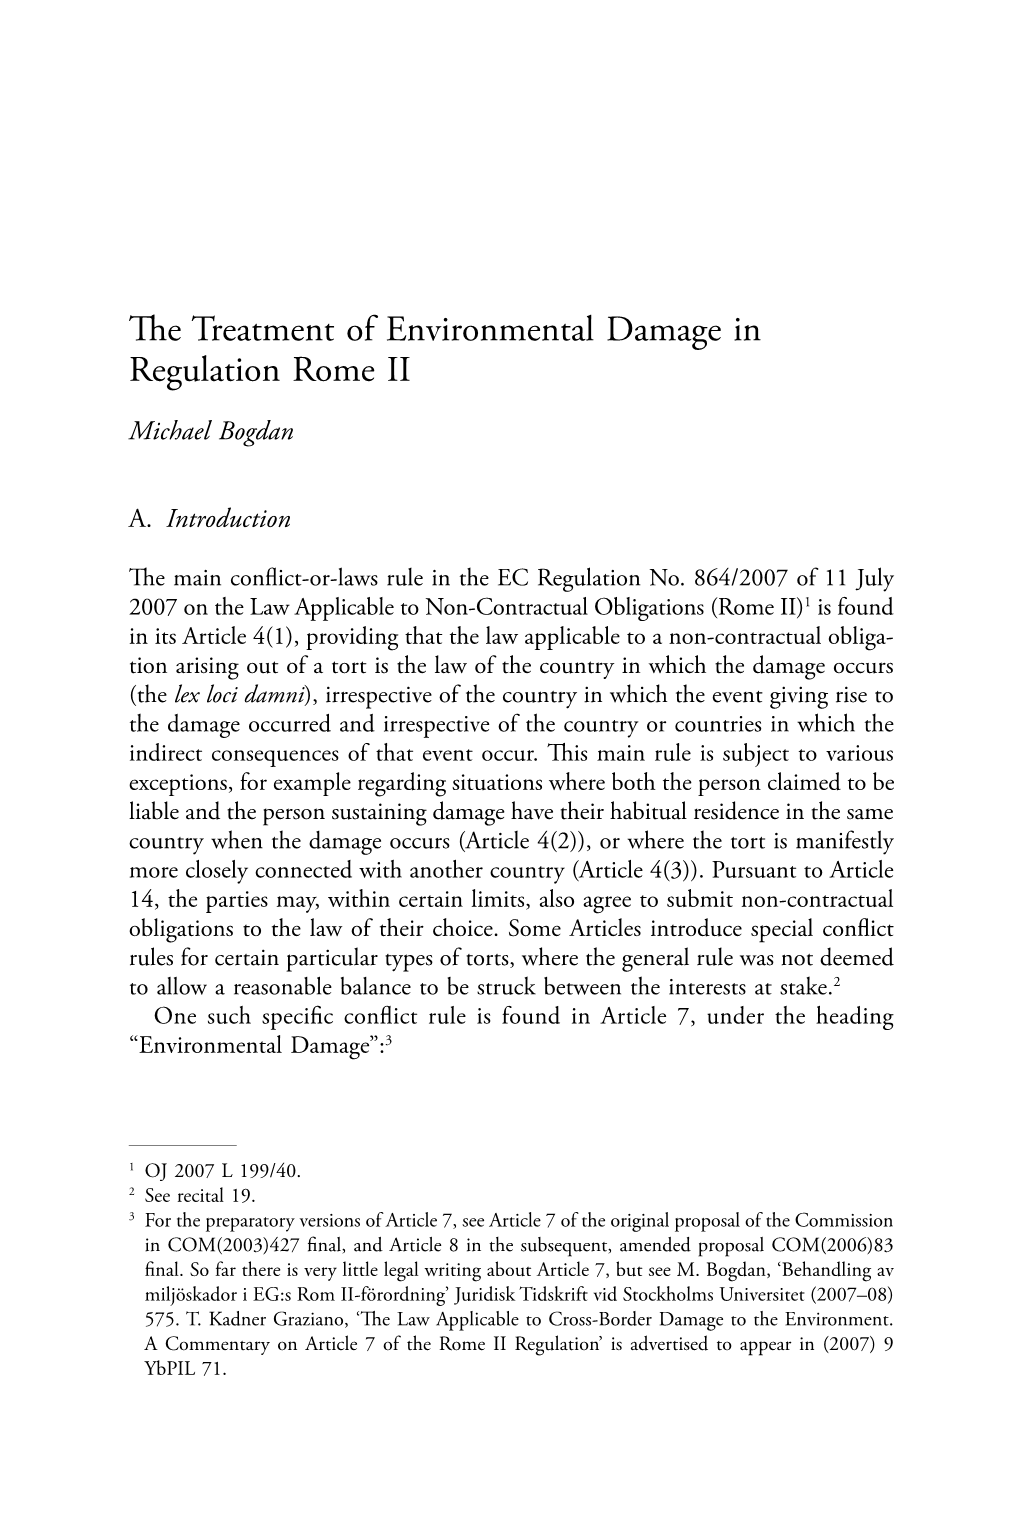 The Treatment of Environmental Damage in Regulation Rome II